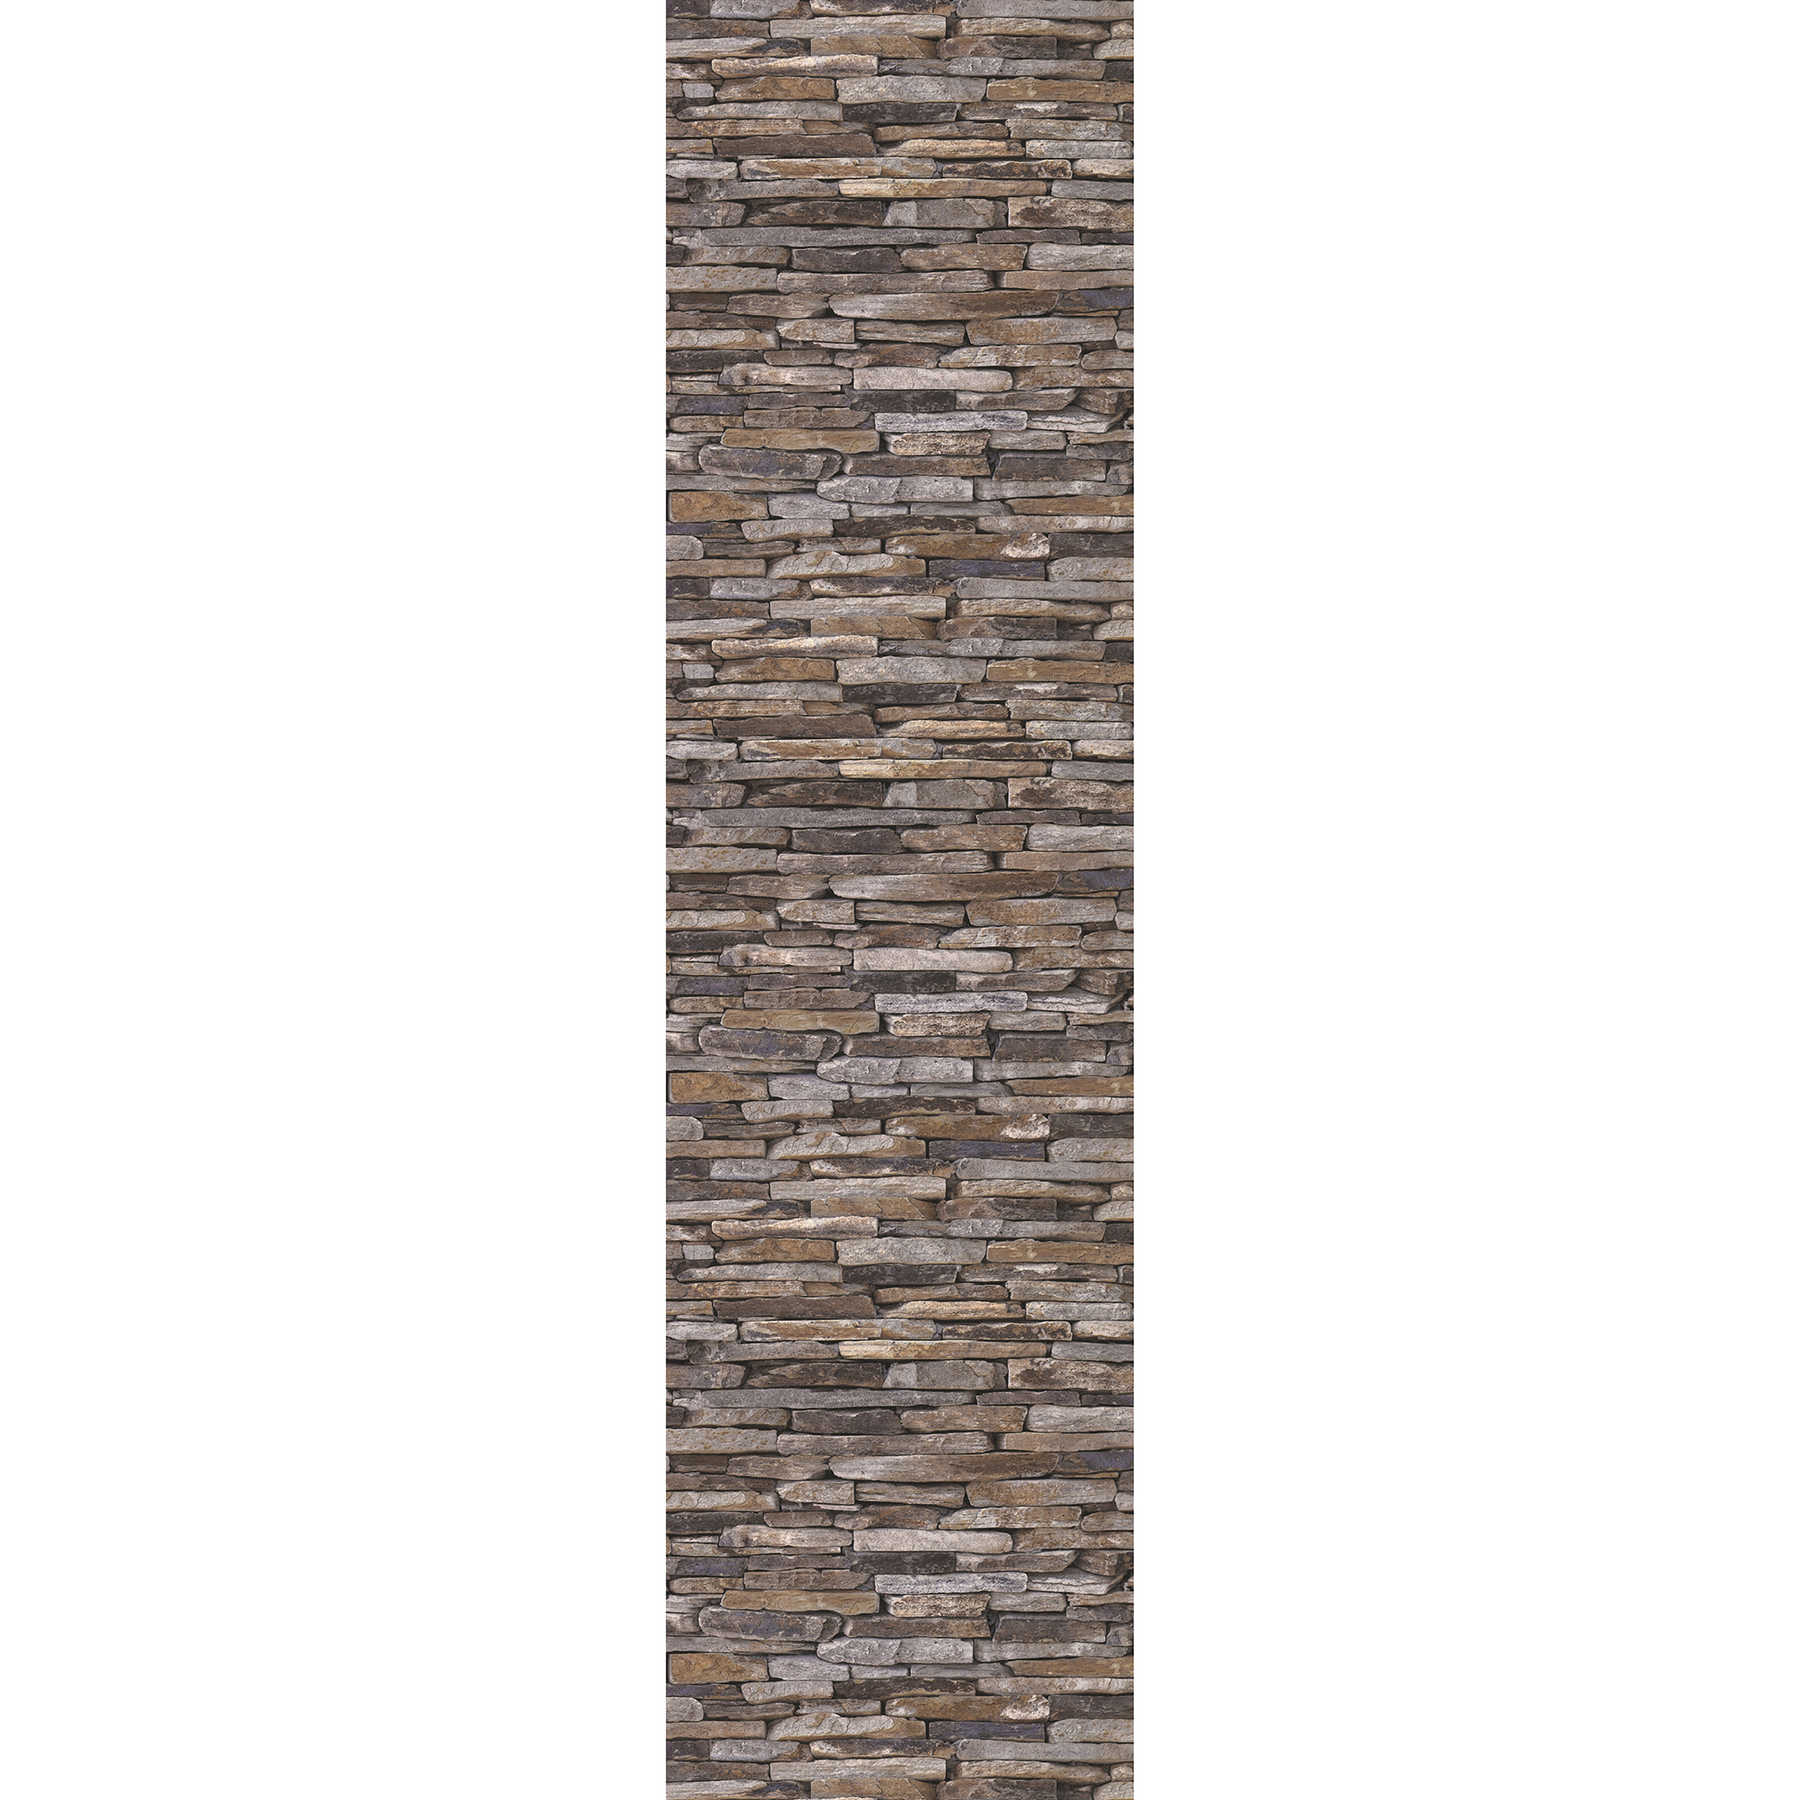 Masonry wallpaper with stone look & 3D motif - brown
